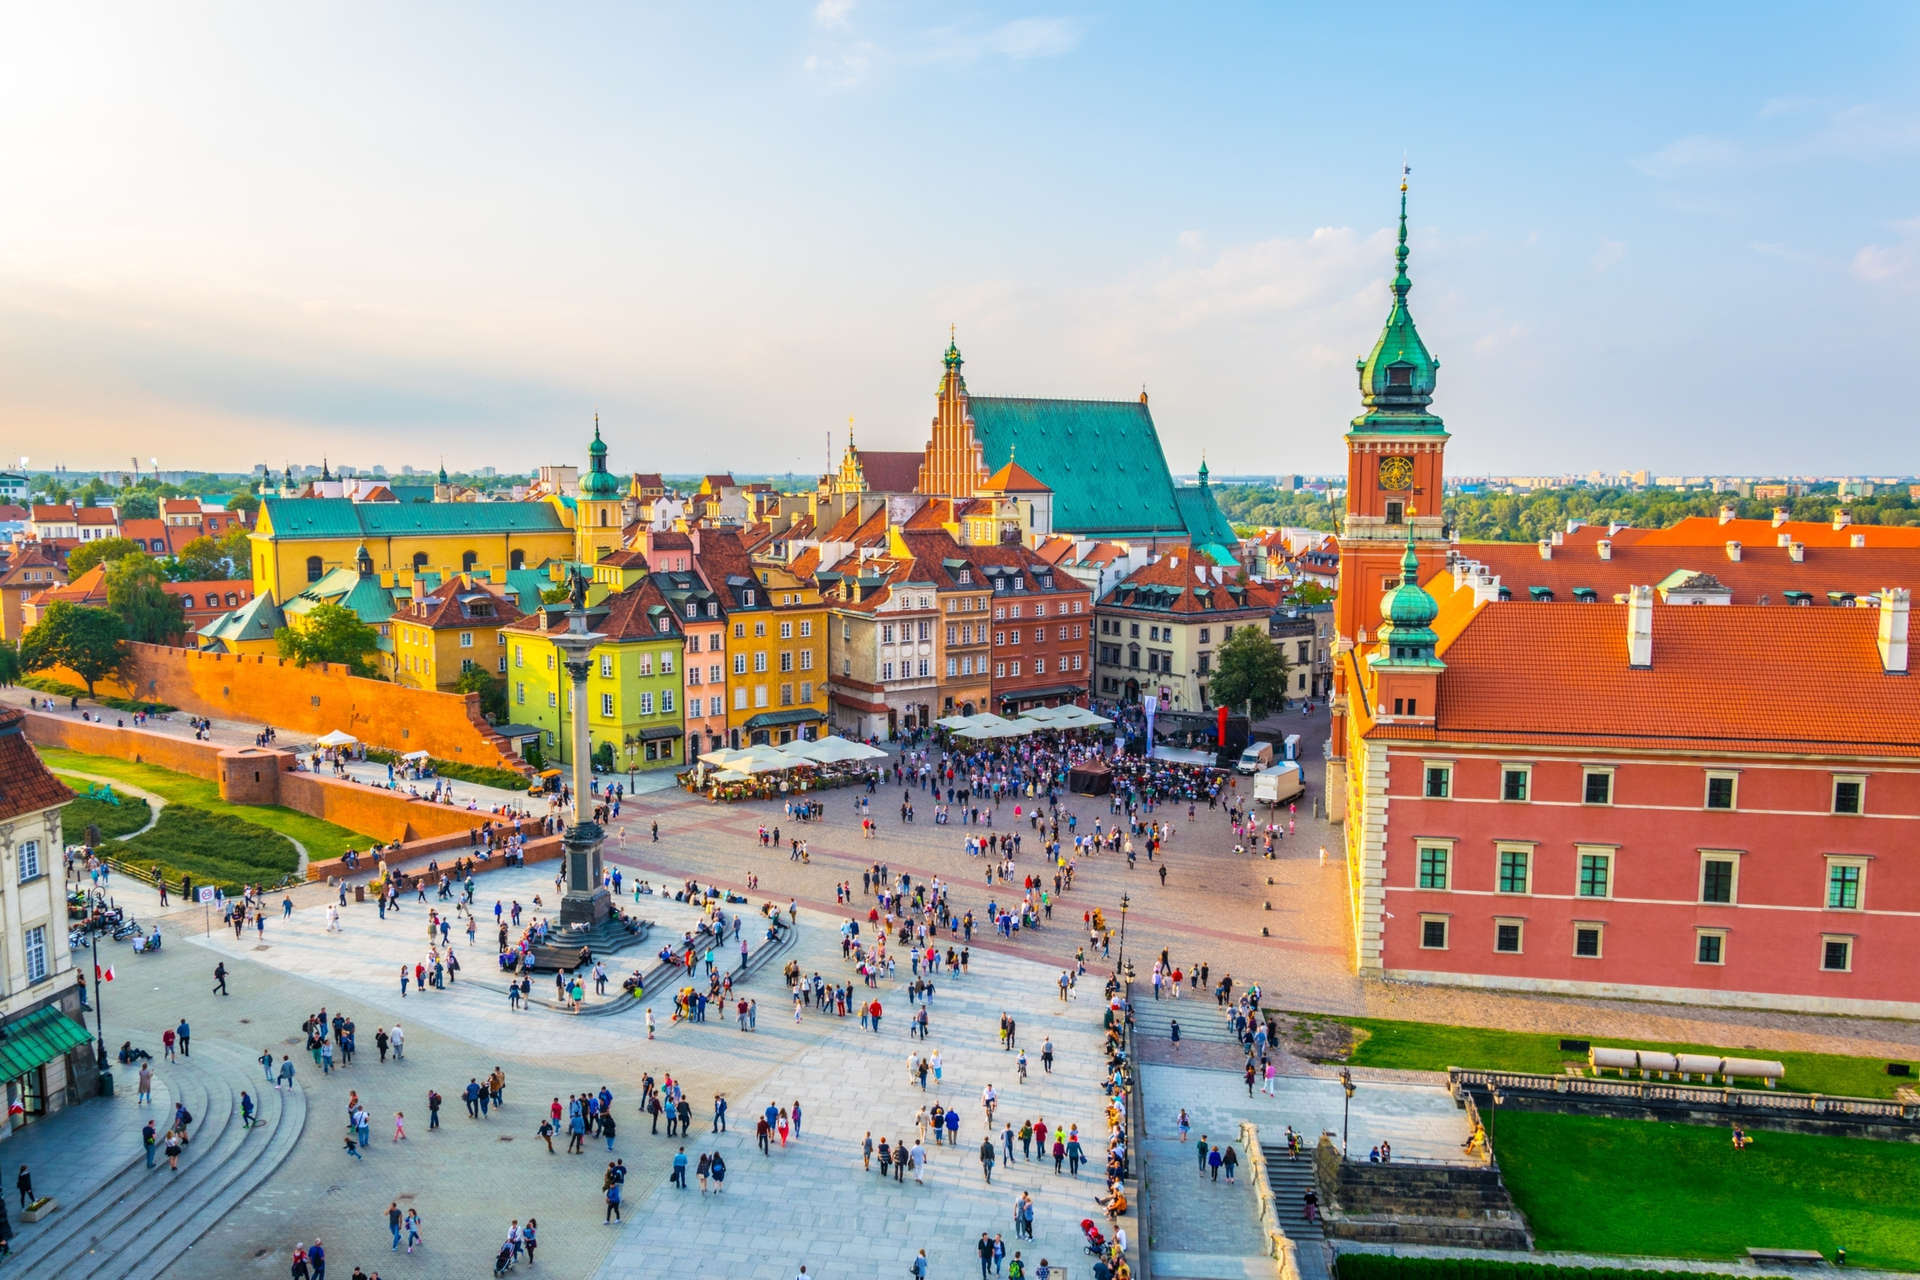 Wander through Warsaw’s reconstructed Old Town, with its riot of gothic, Renaissance and baroque buildings